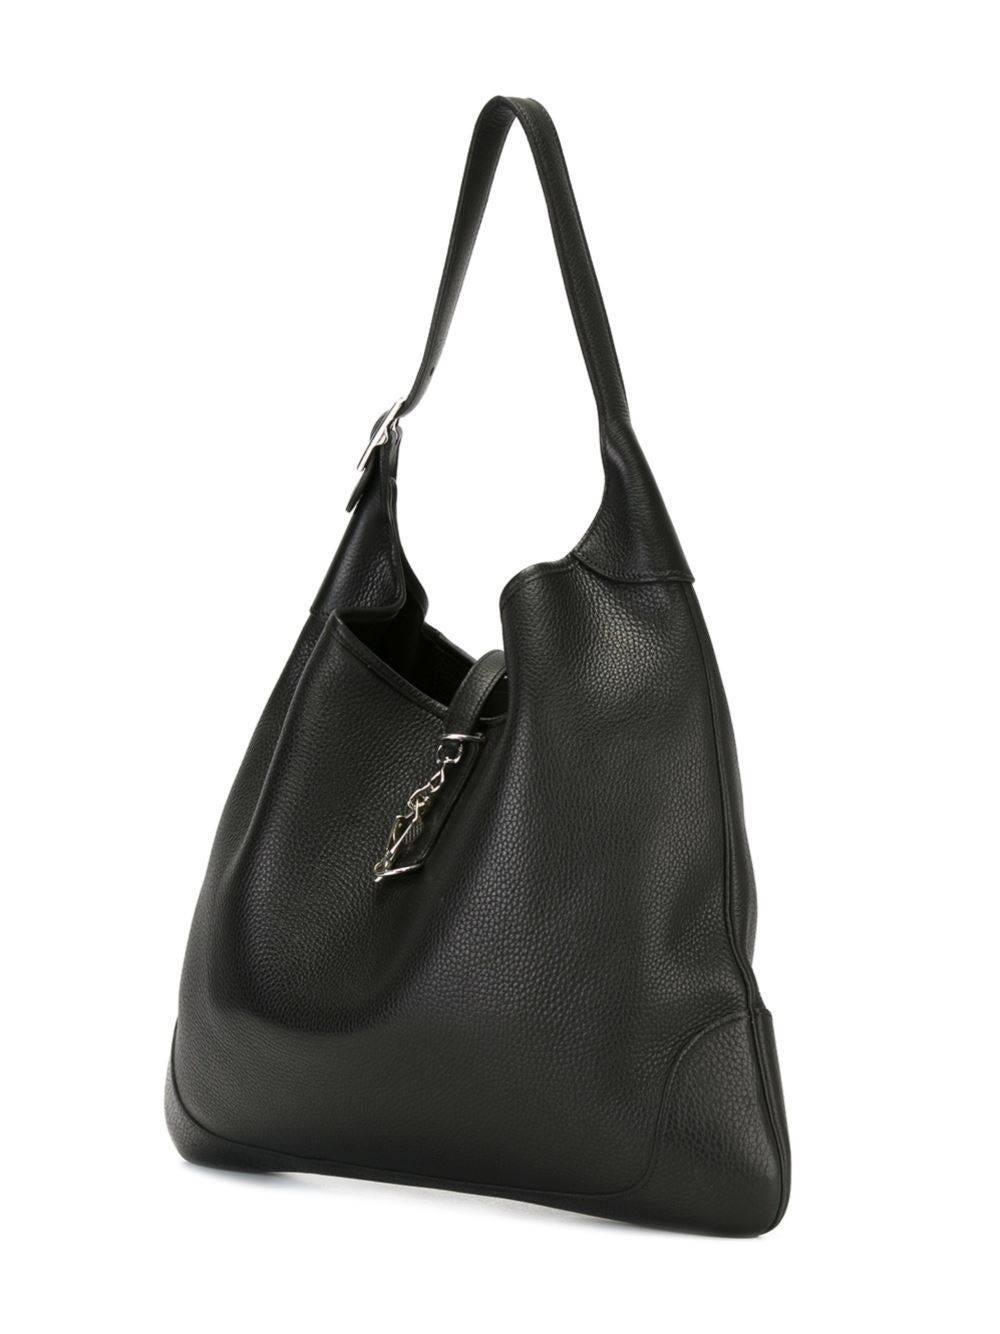 Black leather slouchy hobo tote from Hermès Vintage featuring a pebbled leather texture, a strap closure, silver-tone hardware, an internal zipped pocket and an adjustable top handle. This bag comes with its original dust bag.

Colour: